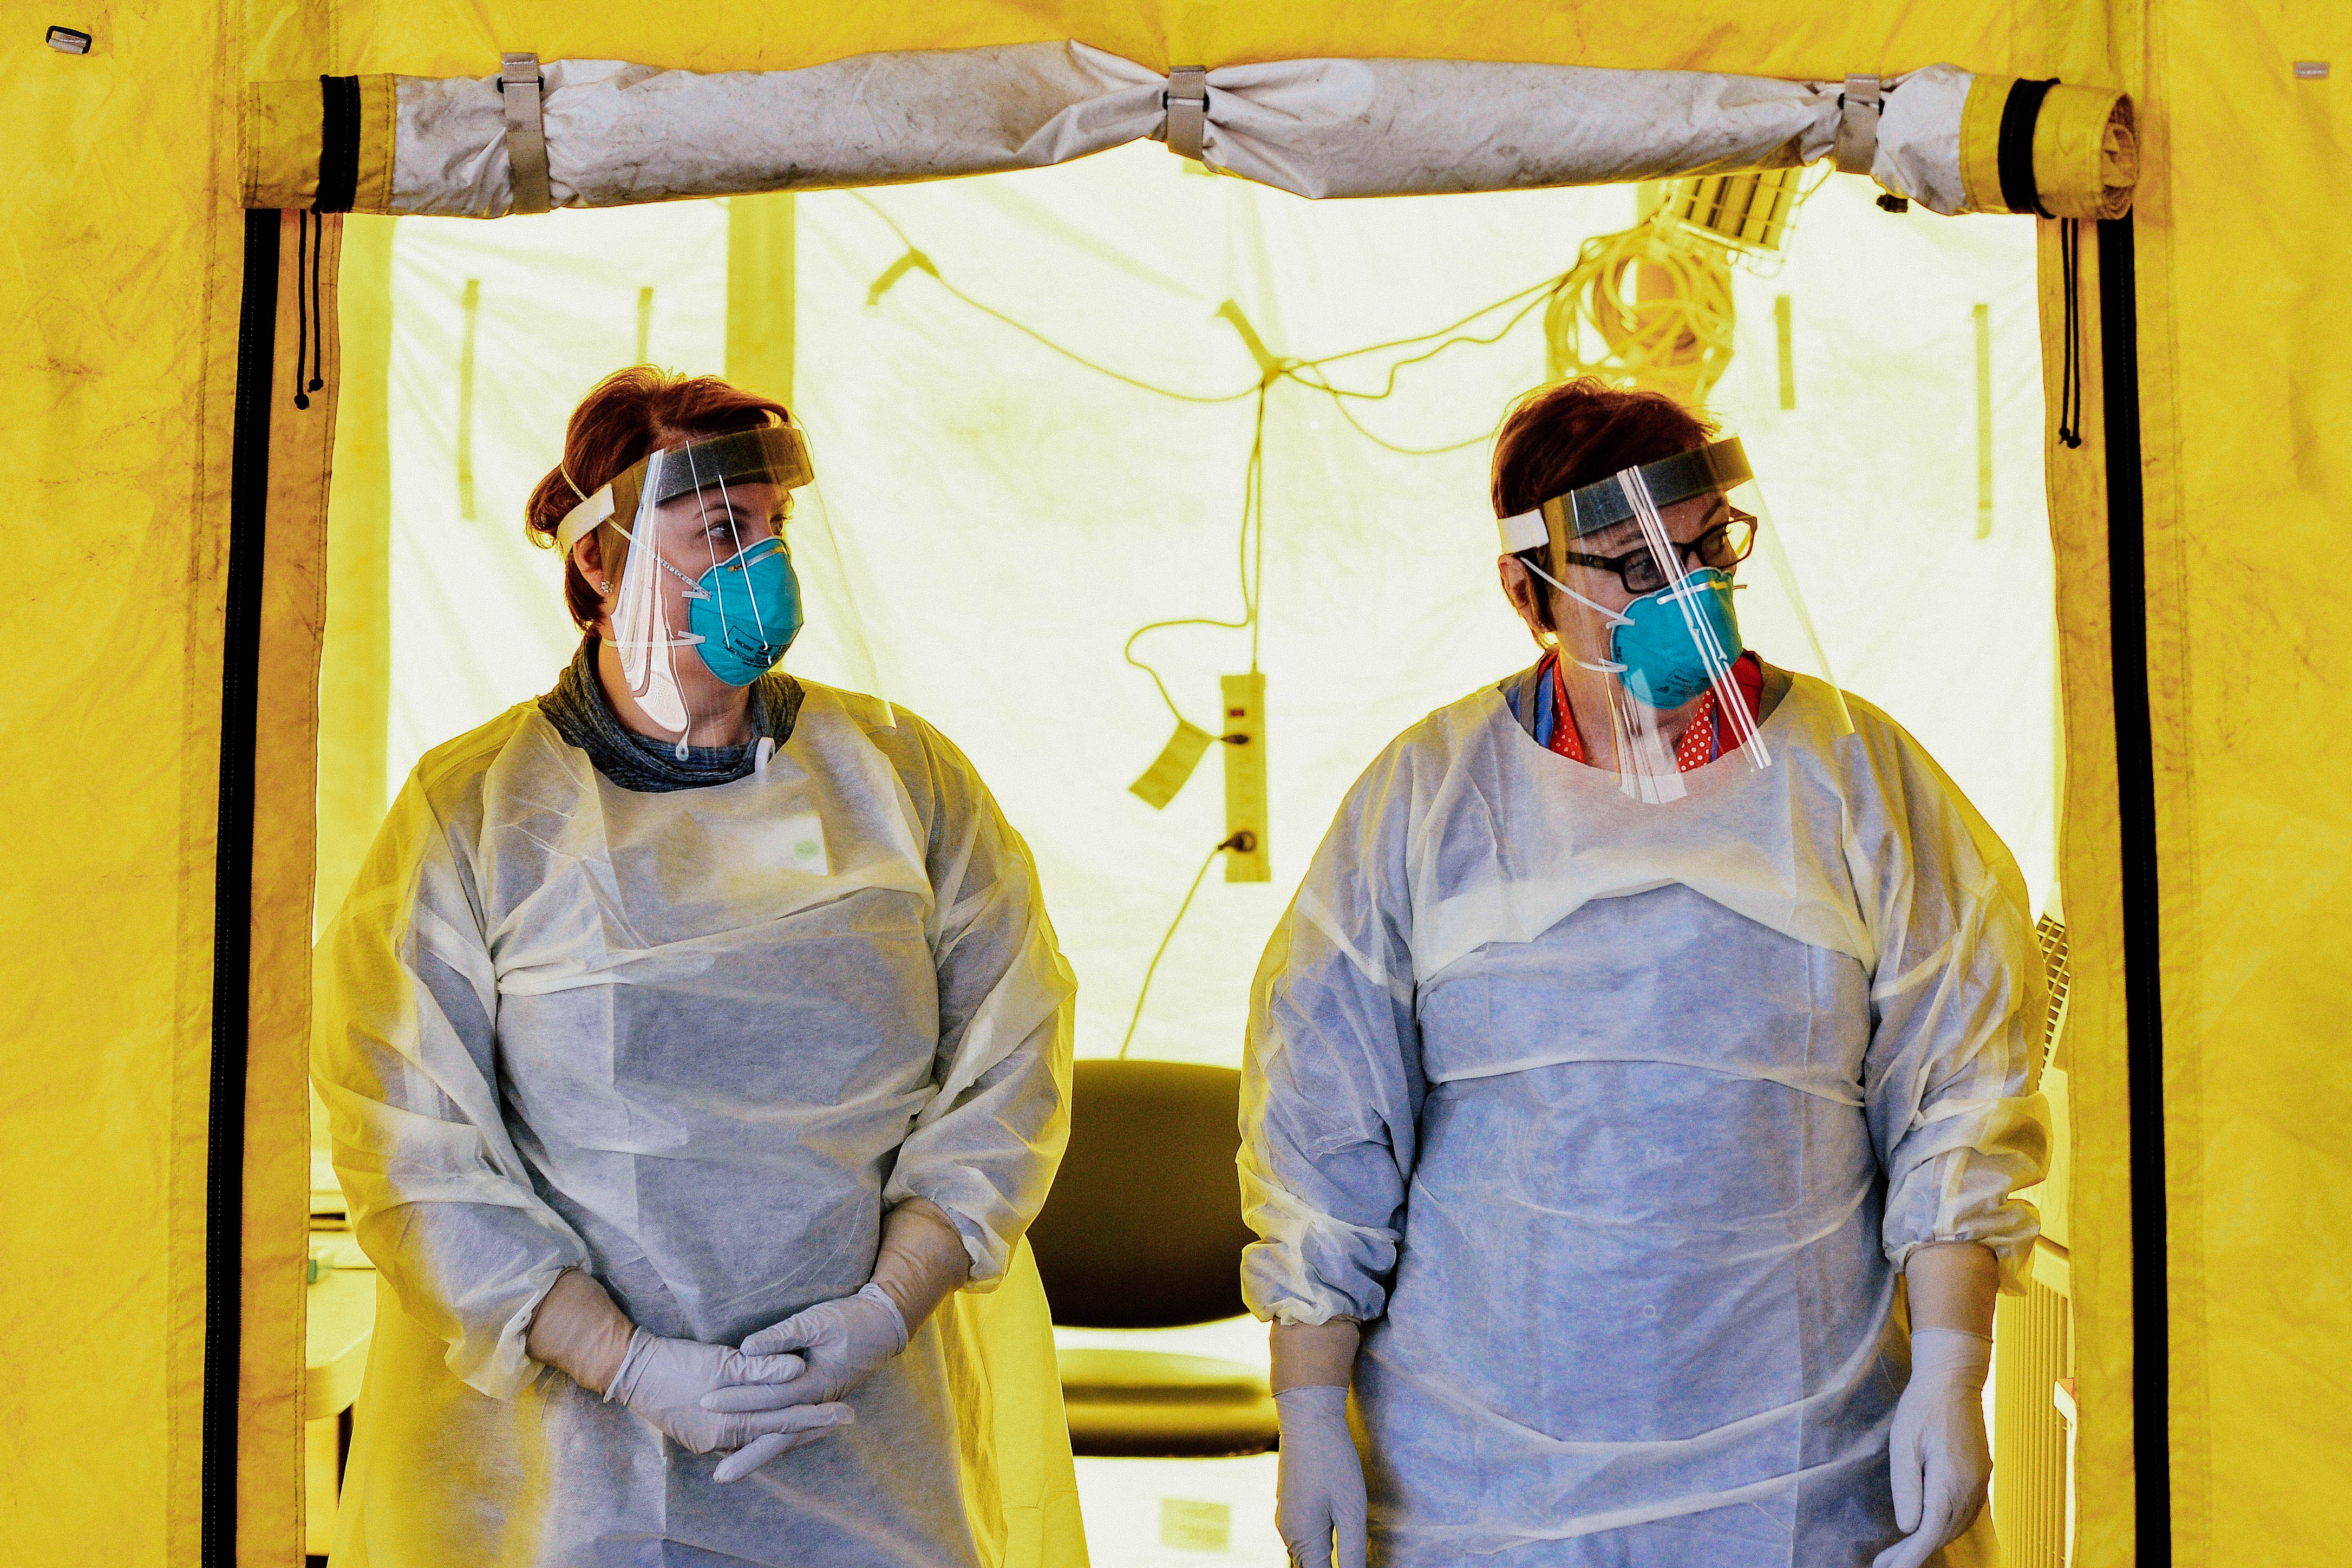 Two people wear masks and other protective gear in front of a tent doorway.